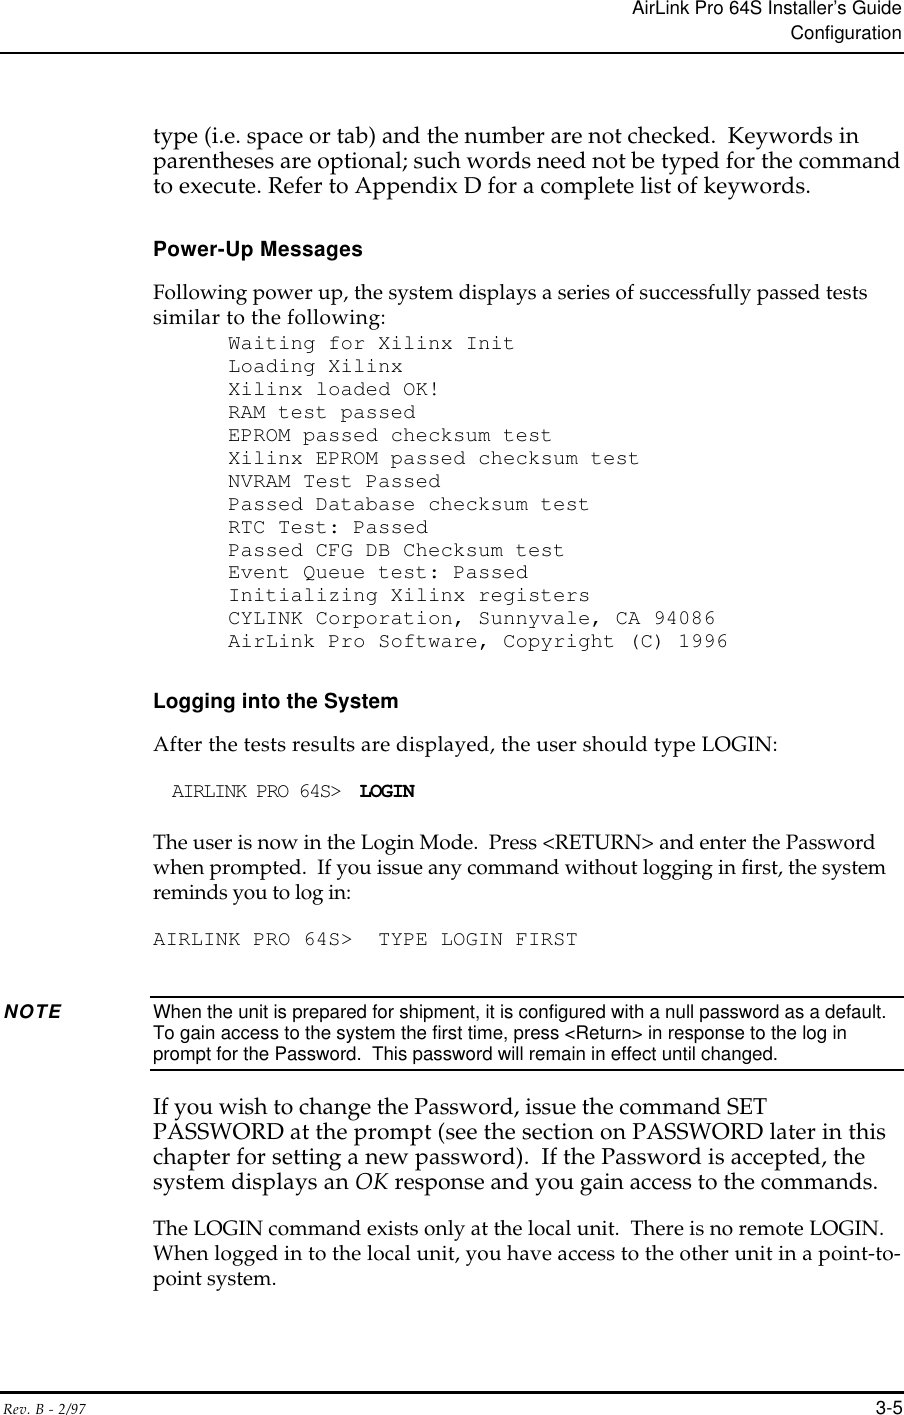 AirLink Pro 64S Installer’s GuideConfigurationRev. B - 2/97 3-5type (i.e. space or tab) and the number are not checked.  Keywords inparentheses are optional; such words need not be typed for the commandto execute. Refer to Appendix D for a complete list of keywords.Power-Up MessagesFollowing power up, the system displays a series of successfully passed testssimilar to the following:Waiting for Xilinx InitLoading XilinxXilinx loaded OK!RAM test passedEPROM passed checksum testXilinx EPROM passed checksum testNVRAM Test PassedPassed Database checksum testRTC Test: PassedPassed CFG DB Checksum testEvent Queue test: PassedInitializing Xilinx registersCYLINK Corporation, Sunnyvale, CA 94086AirLink Pro Software, Copyright (C) 1996Logging into the SystemAfter the tests results are displayed, the user should type LOGIN:AIRLINK PRO 64S&gt;  LOGINThe user is now in the Login Mode.  Press &lt;RETURN&gt; and enter the Passwordwhen prompted.  If you issue any command without logging in first, the systemreminds you to log in:AIRLINK PRO 64S&gt;  TYPE LOGIN FIRSTNOTE When the unit is prepared for shipment, it is configured with a null password as a default.To gain access to the system the first time, press &lt;Return&gt; in response to the log inprompt for the Password.  This password will remain in effect until changed.If you wish to change the Password, issue the command SETPASSWORD at the prompt (see the section on PASSWORD later in thischapter for setting a new password).  If the Password is accepted, thesystem displays an OK response and you gain access to the commands.The LOGIN command exists only at the local unit.  There is no remote LOGIN.When logged in to the local unit, you have access to the other unit in a point-to-point system.